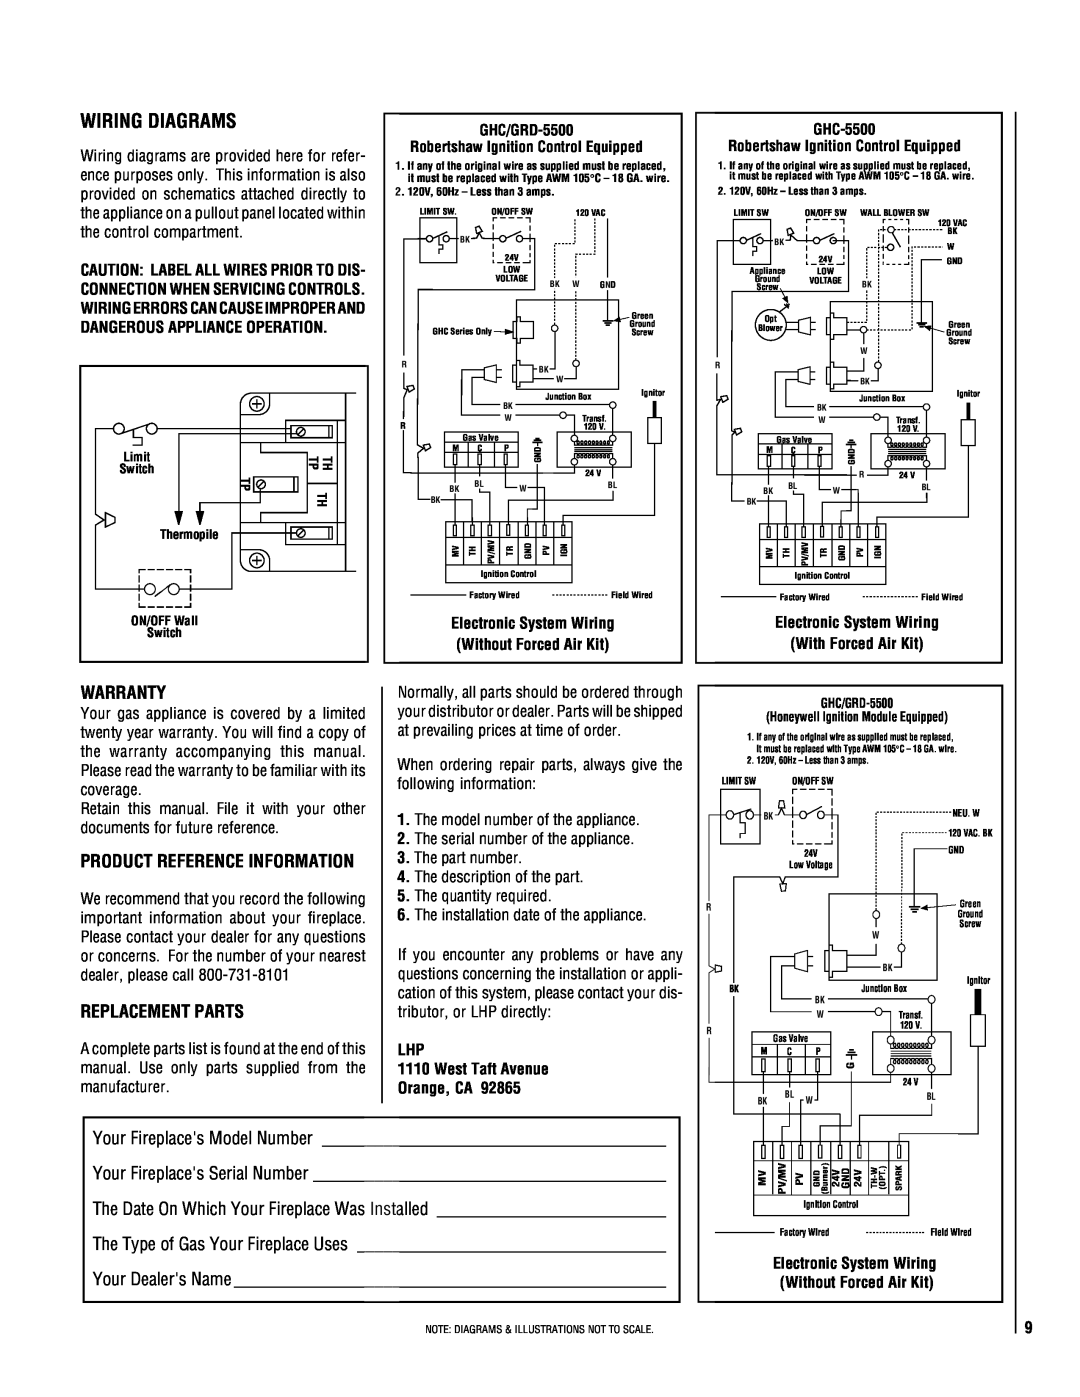 TOA Electronics P0055-DRG manual Wiring Diagrams, Warranty, Product Reference Information, Replacement Parts 